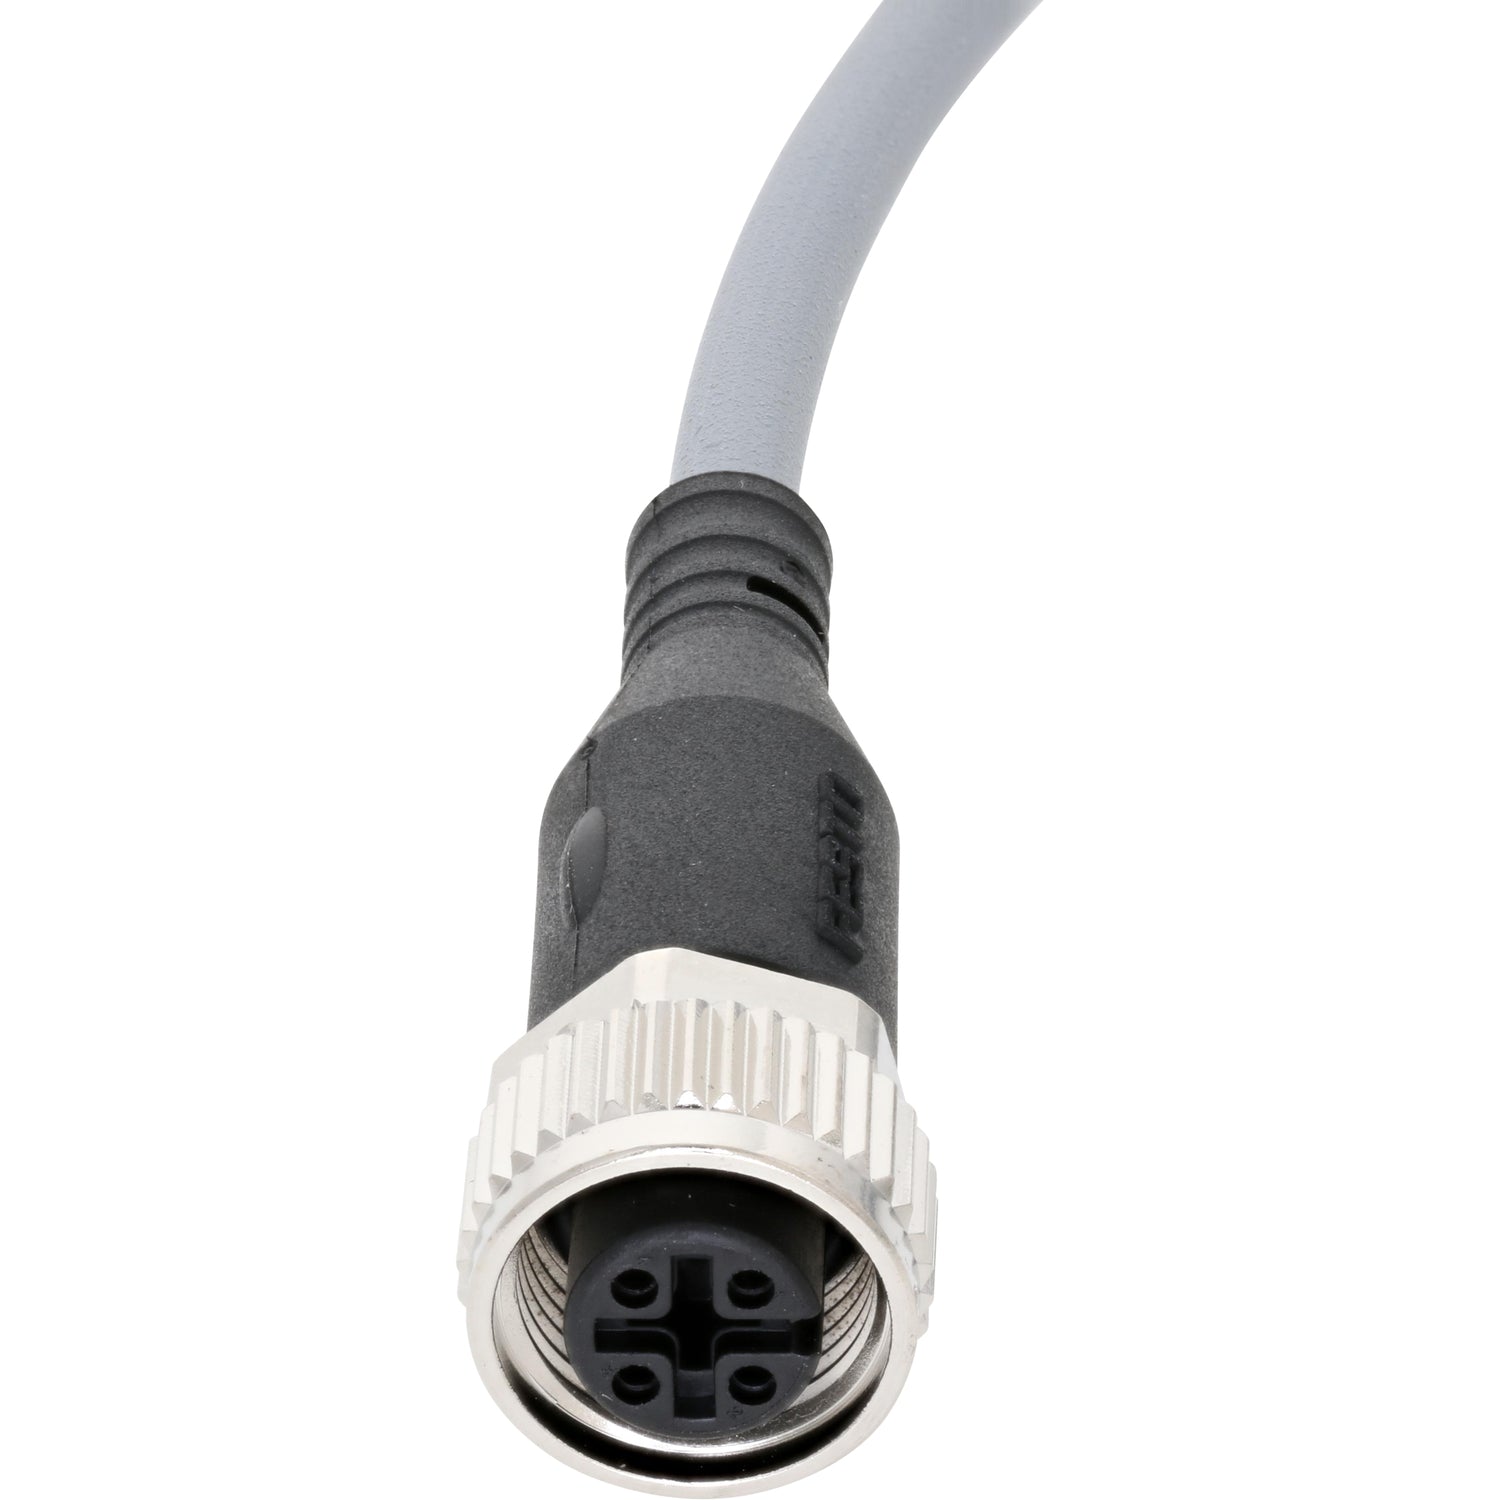 .5 meter grey connecting cable with female molded end. Cable shown on white background.